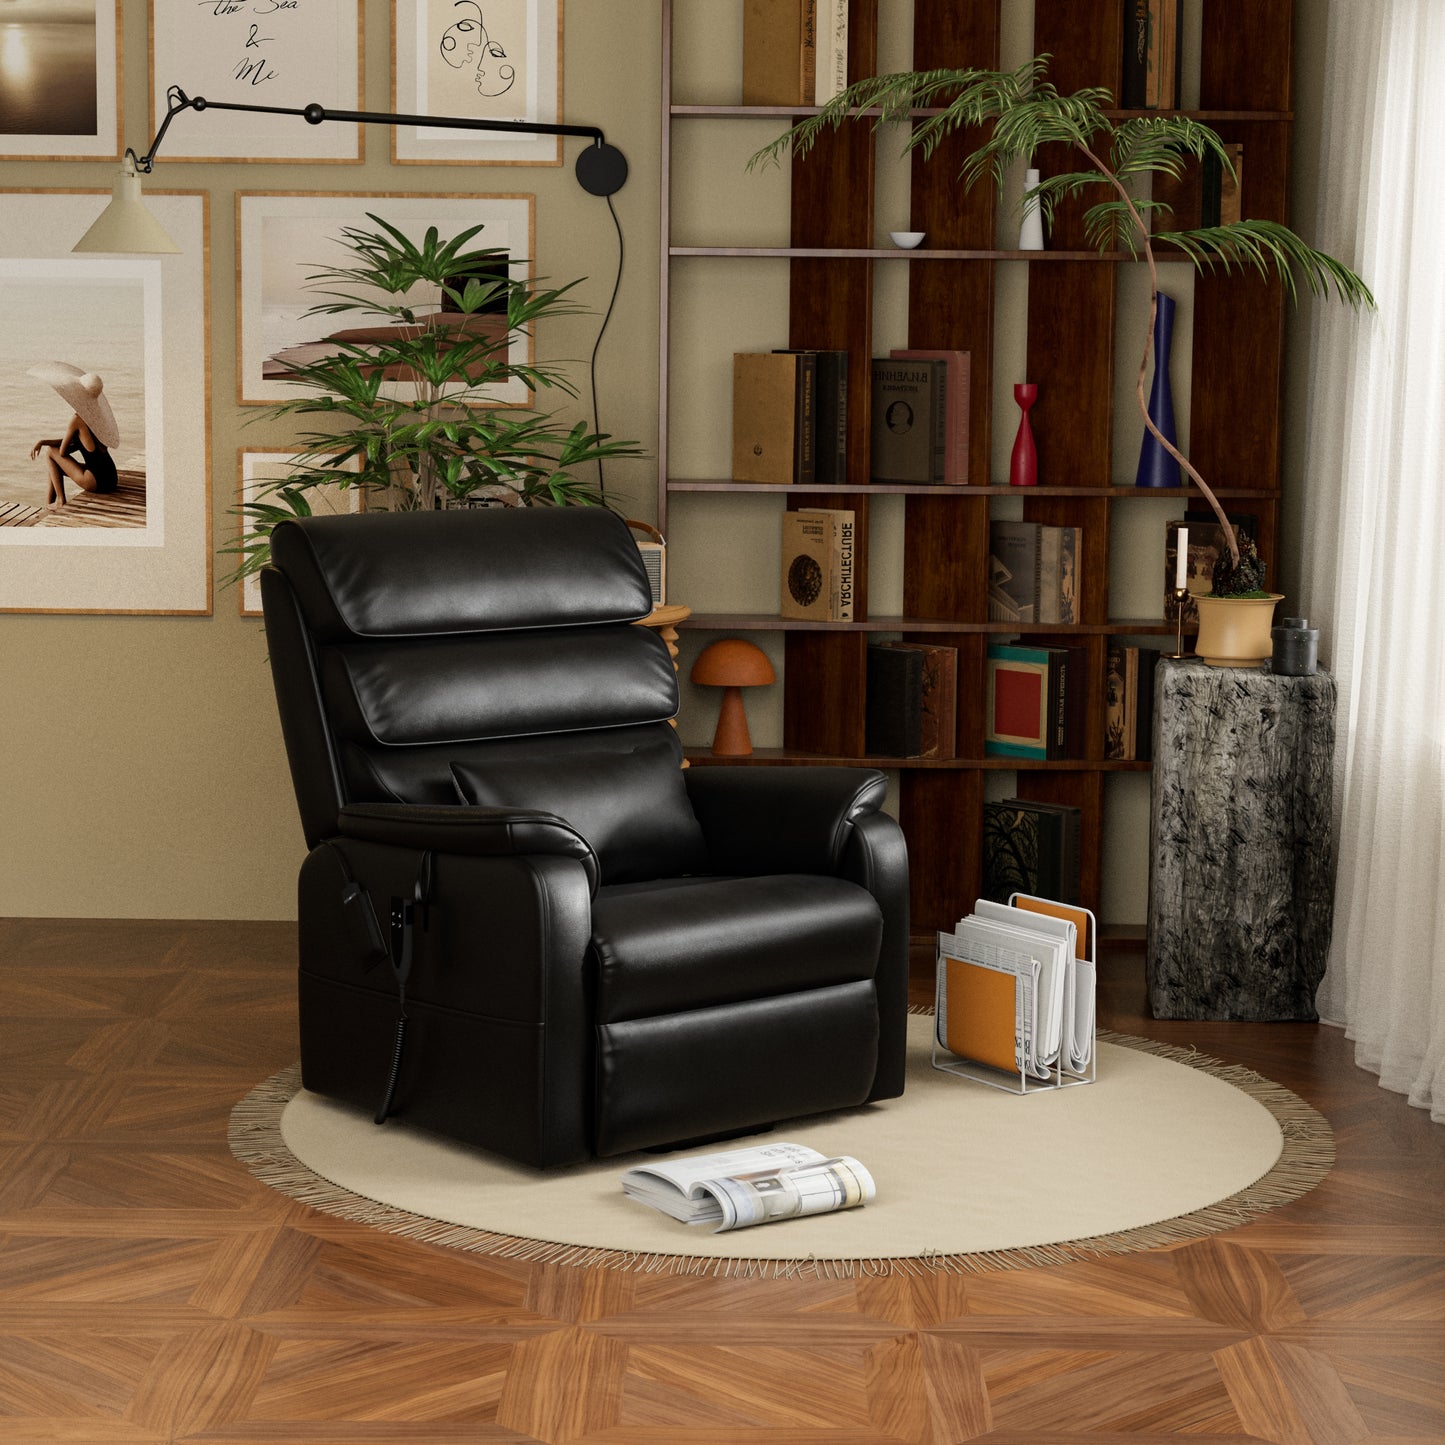 9188 Lay Flat Recliner Lift Chair With Heat And Massage(Medium, Faux Leather Black)